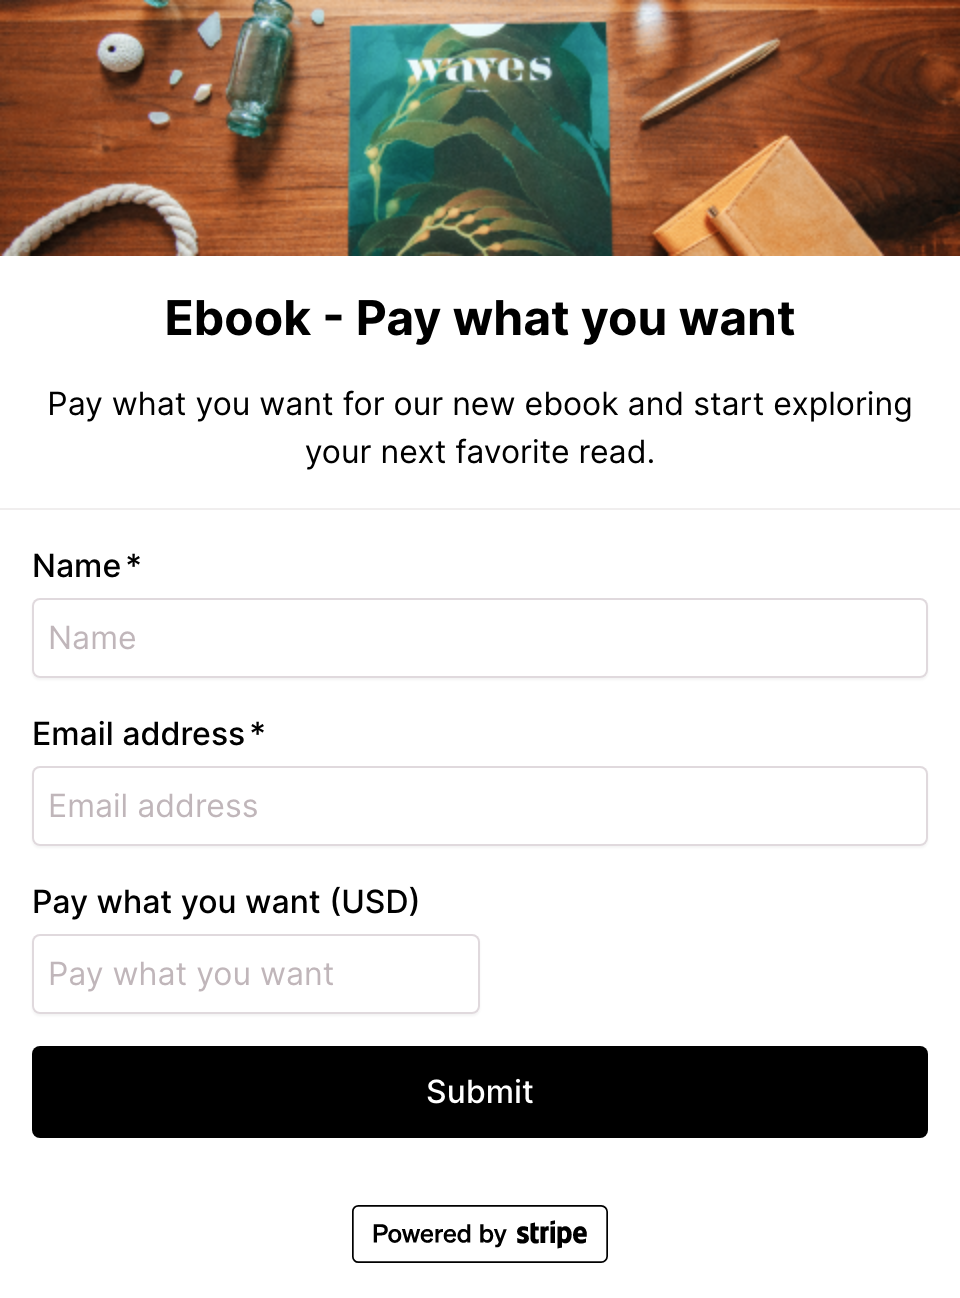 Ebook pay what you want checkout form